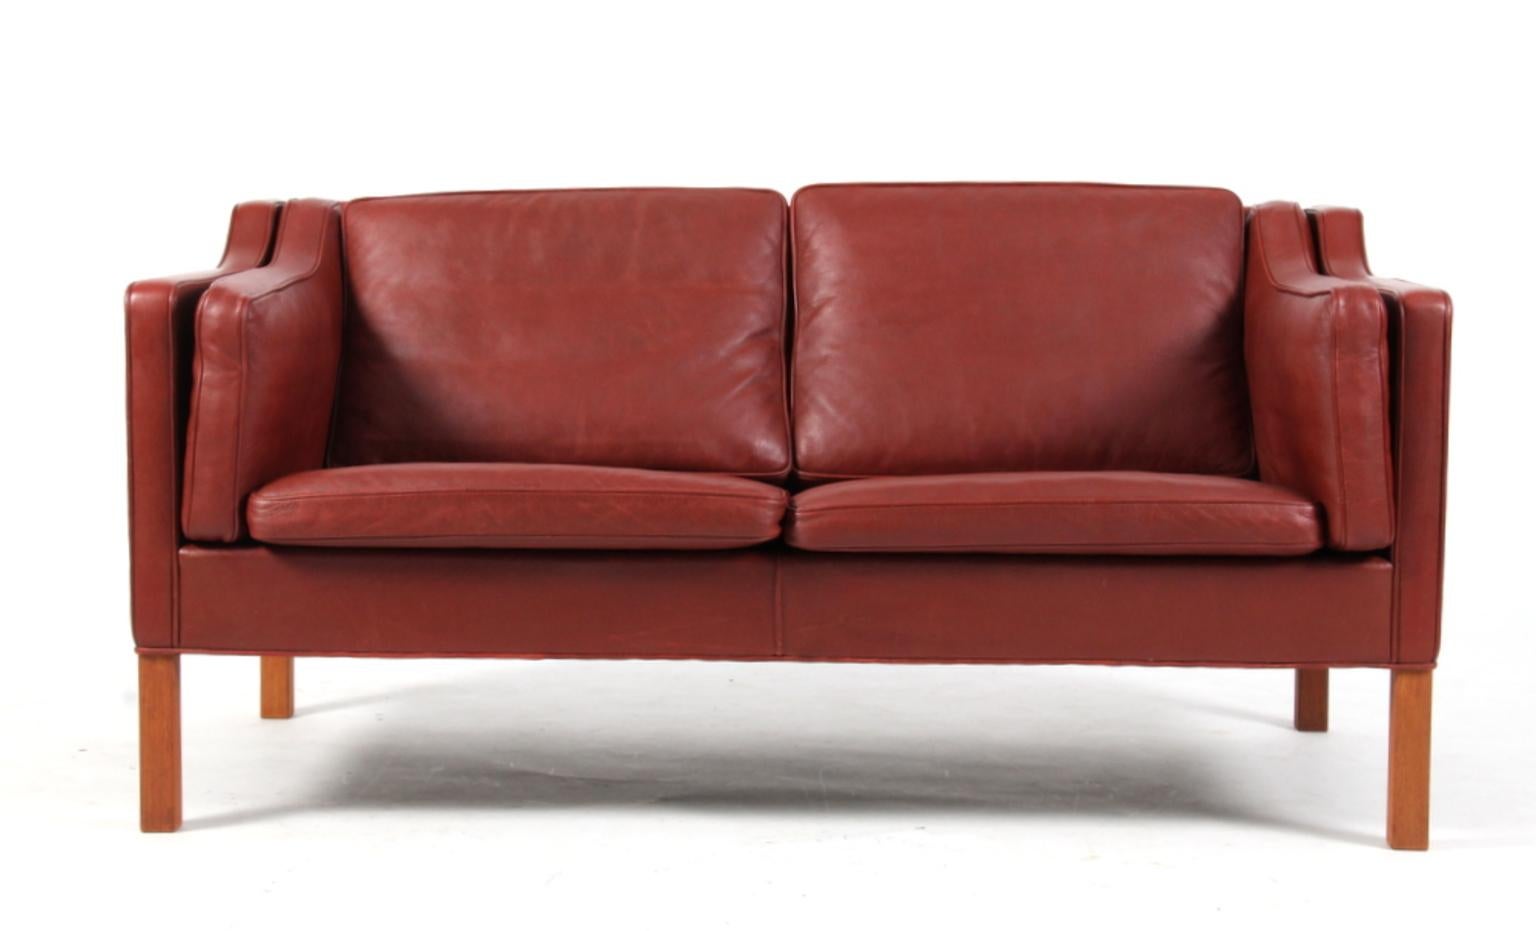 Børge Mogensen two-seat sofa with original Indian red leather upholstery.

Legs of mahogany.

Model 2212, made by Fredericia Furniture.